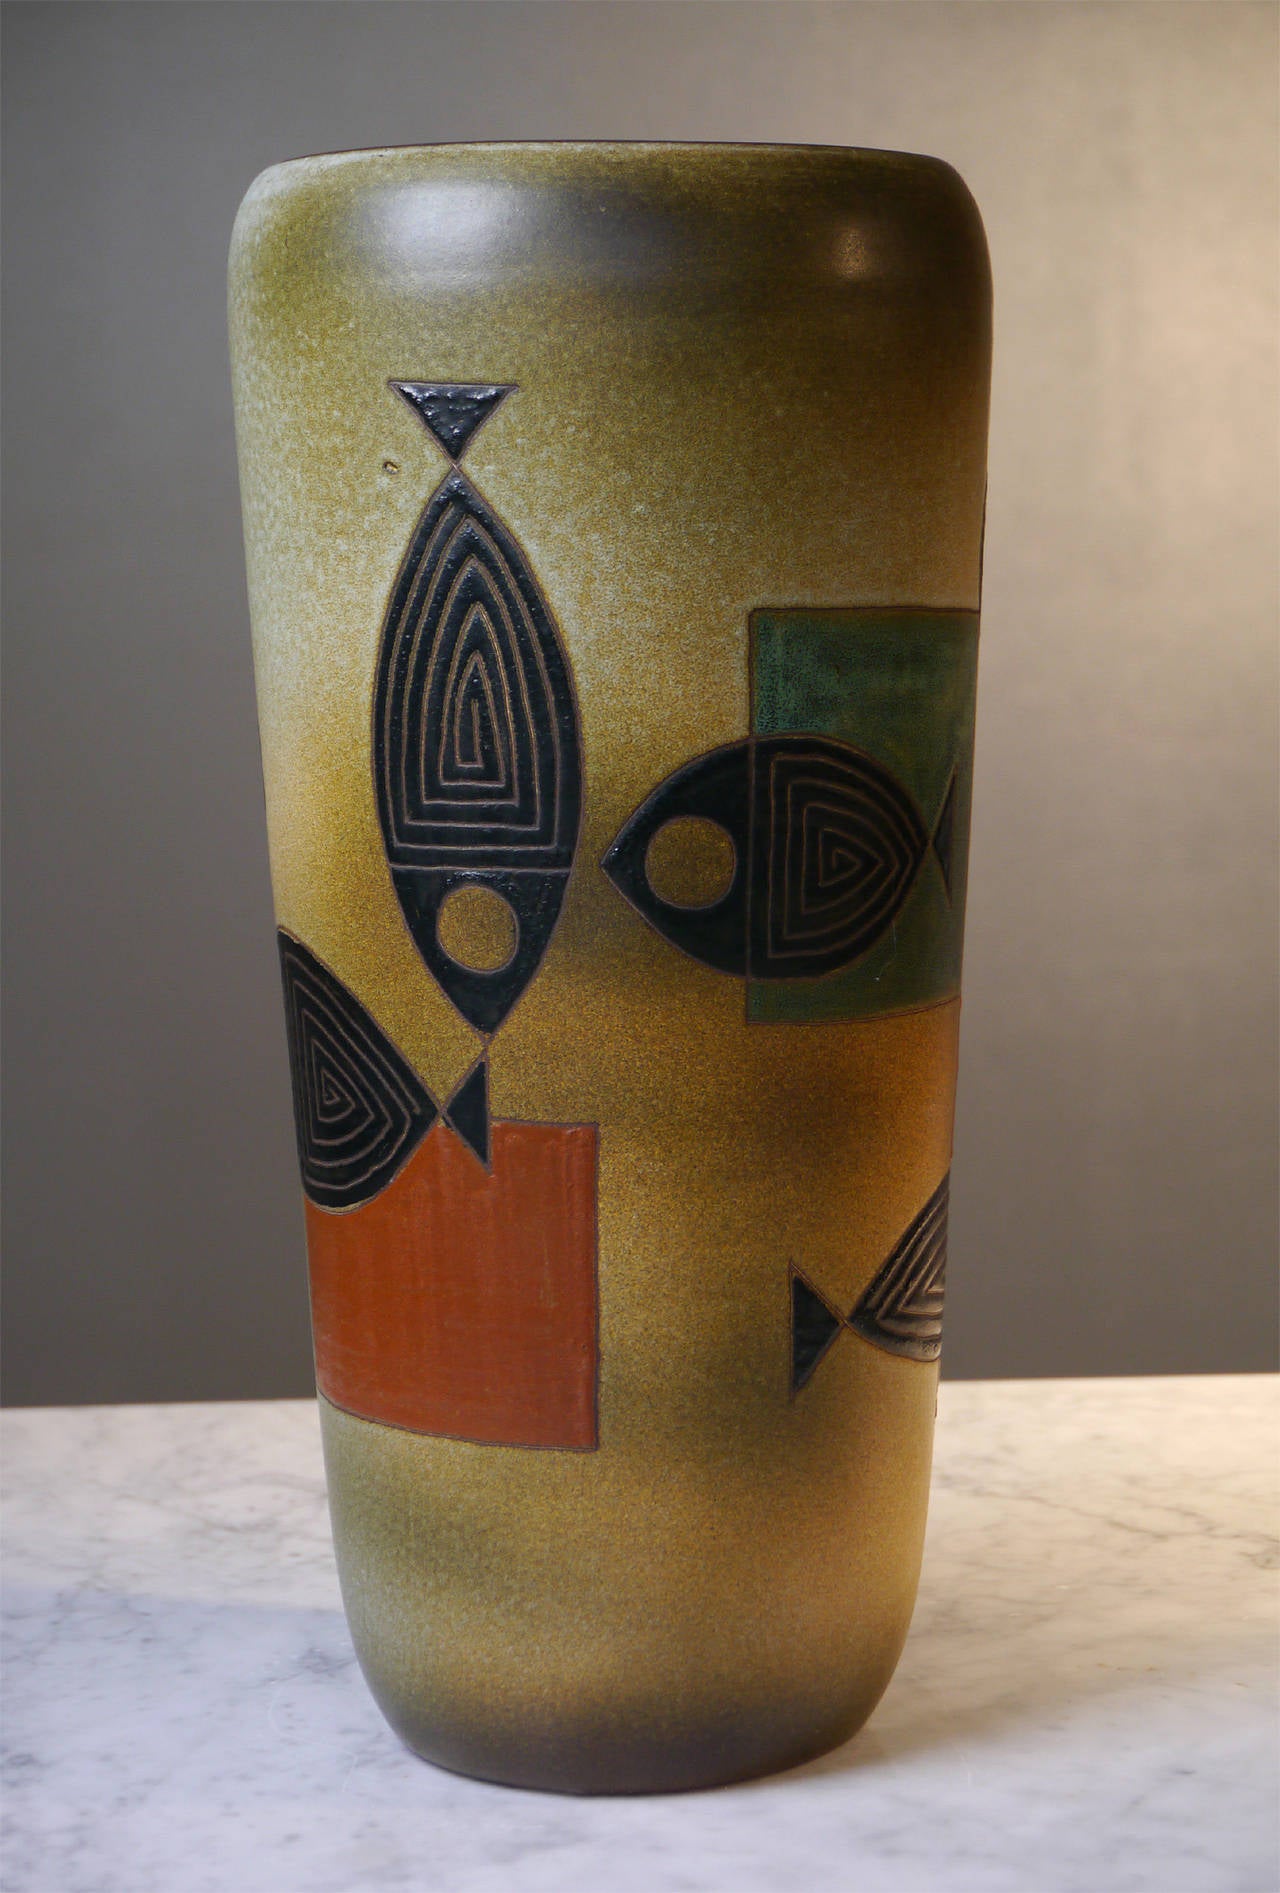 René Maurel's work is renowned to be really singular in the post-war Ceramic
School of Vallauris. 

Perfect enamel glazes, enhanced with his typical sgraffito technic which had probably a great influence on one of his more famous guest,